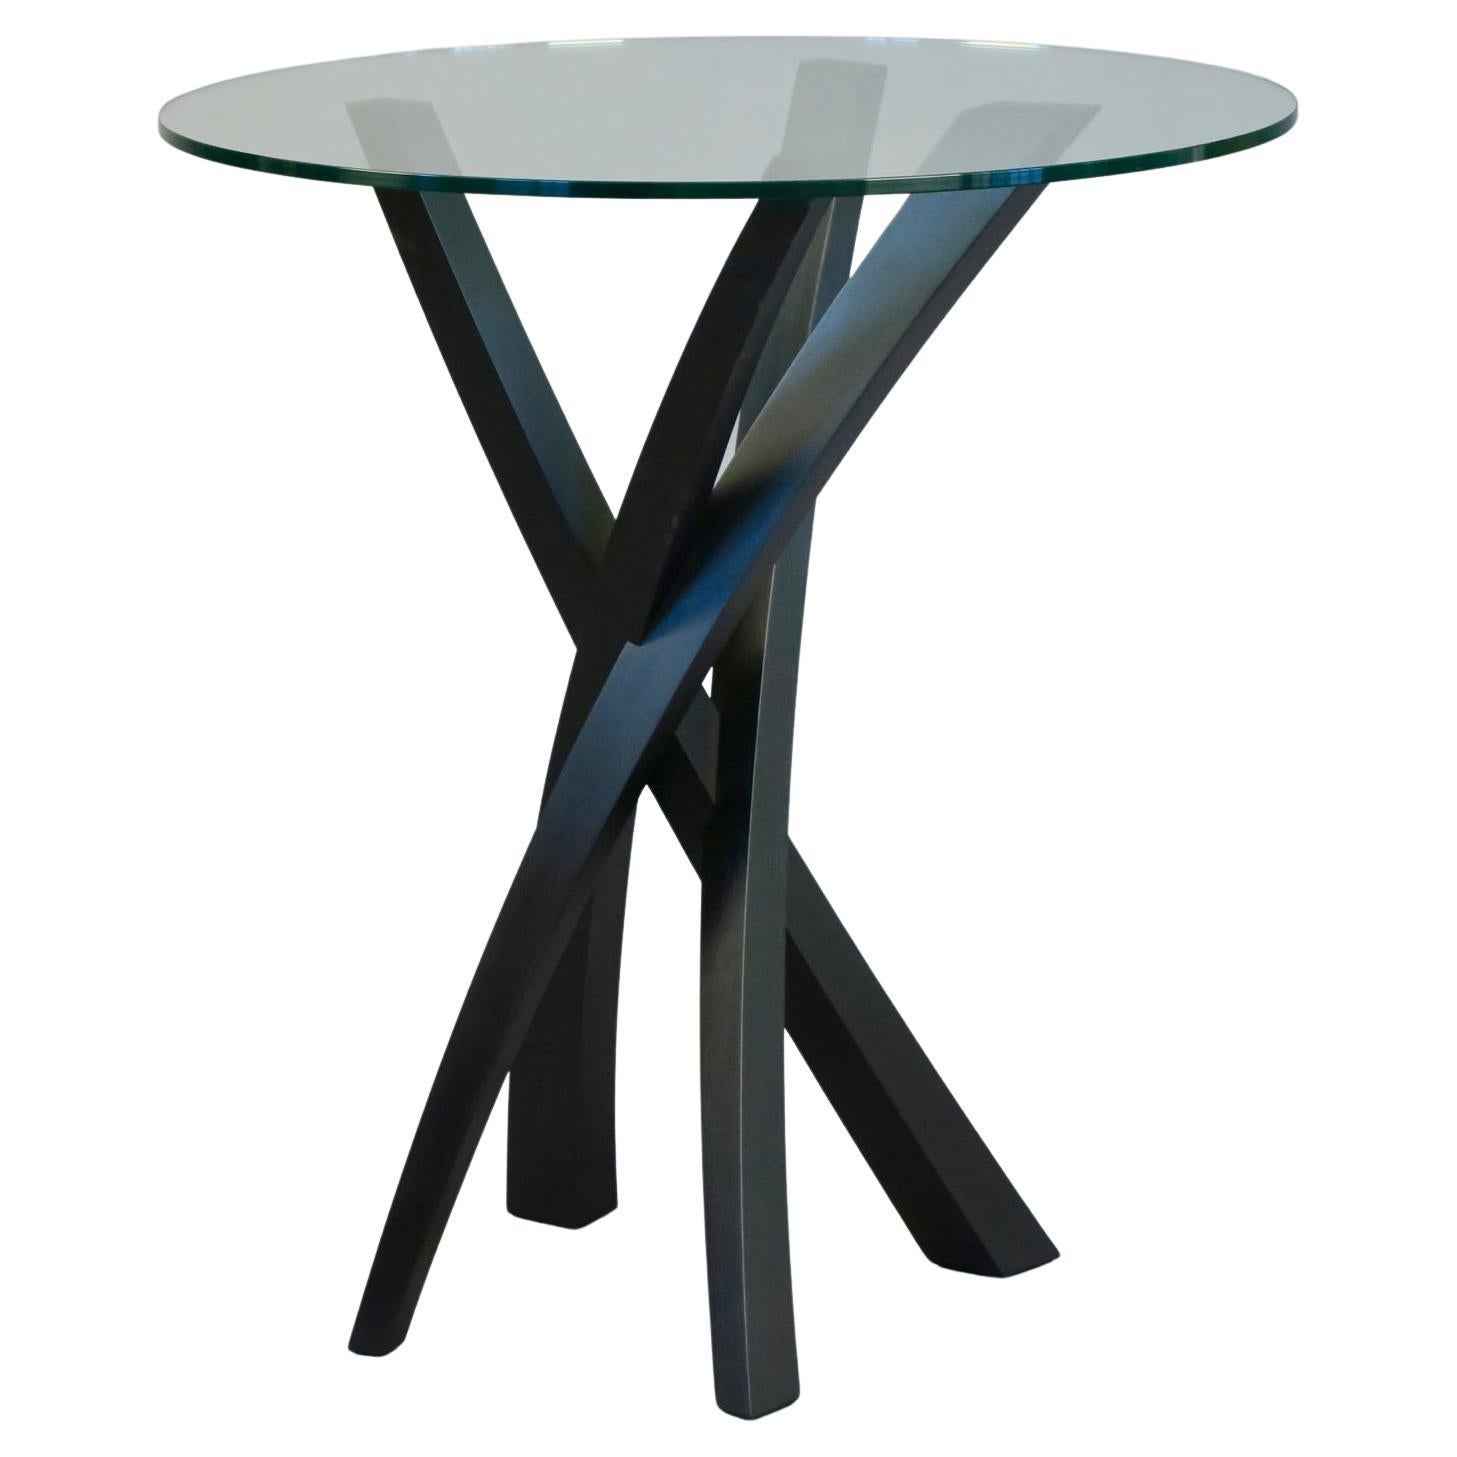 The Laguna end table shown here in ebonized walnut and glass can be made in custom sizes, shapes and various woods and finishes. The same design details apply to all possible variations. Popular glass top shapes are oval, rectangular, square and